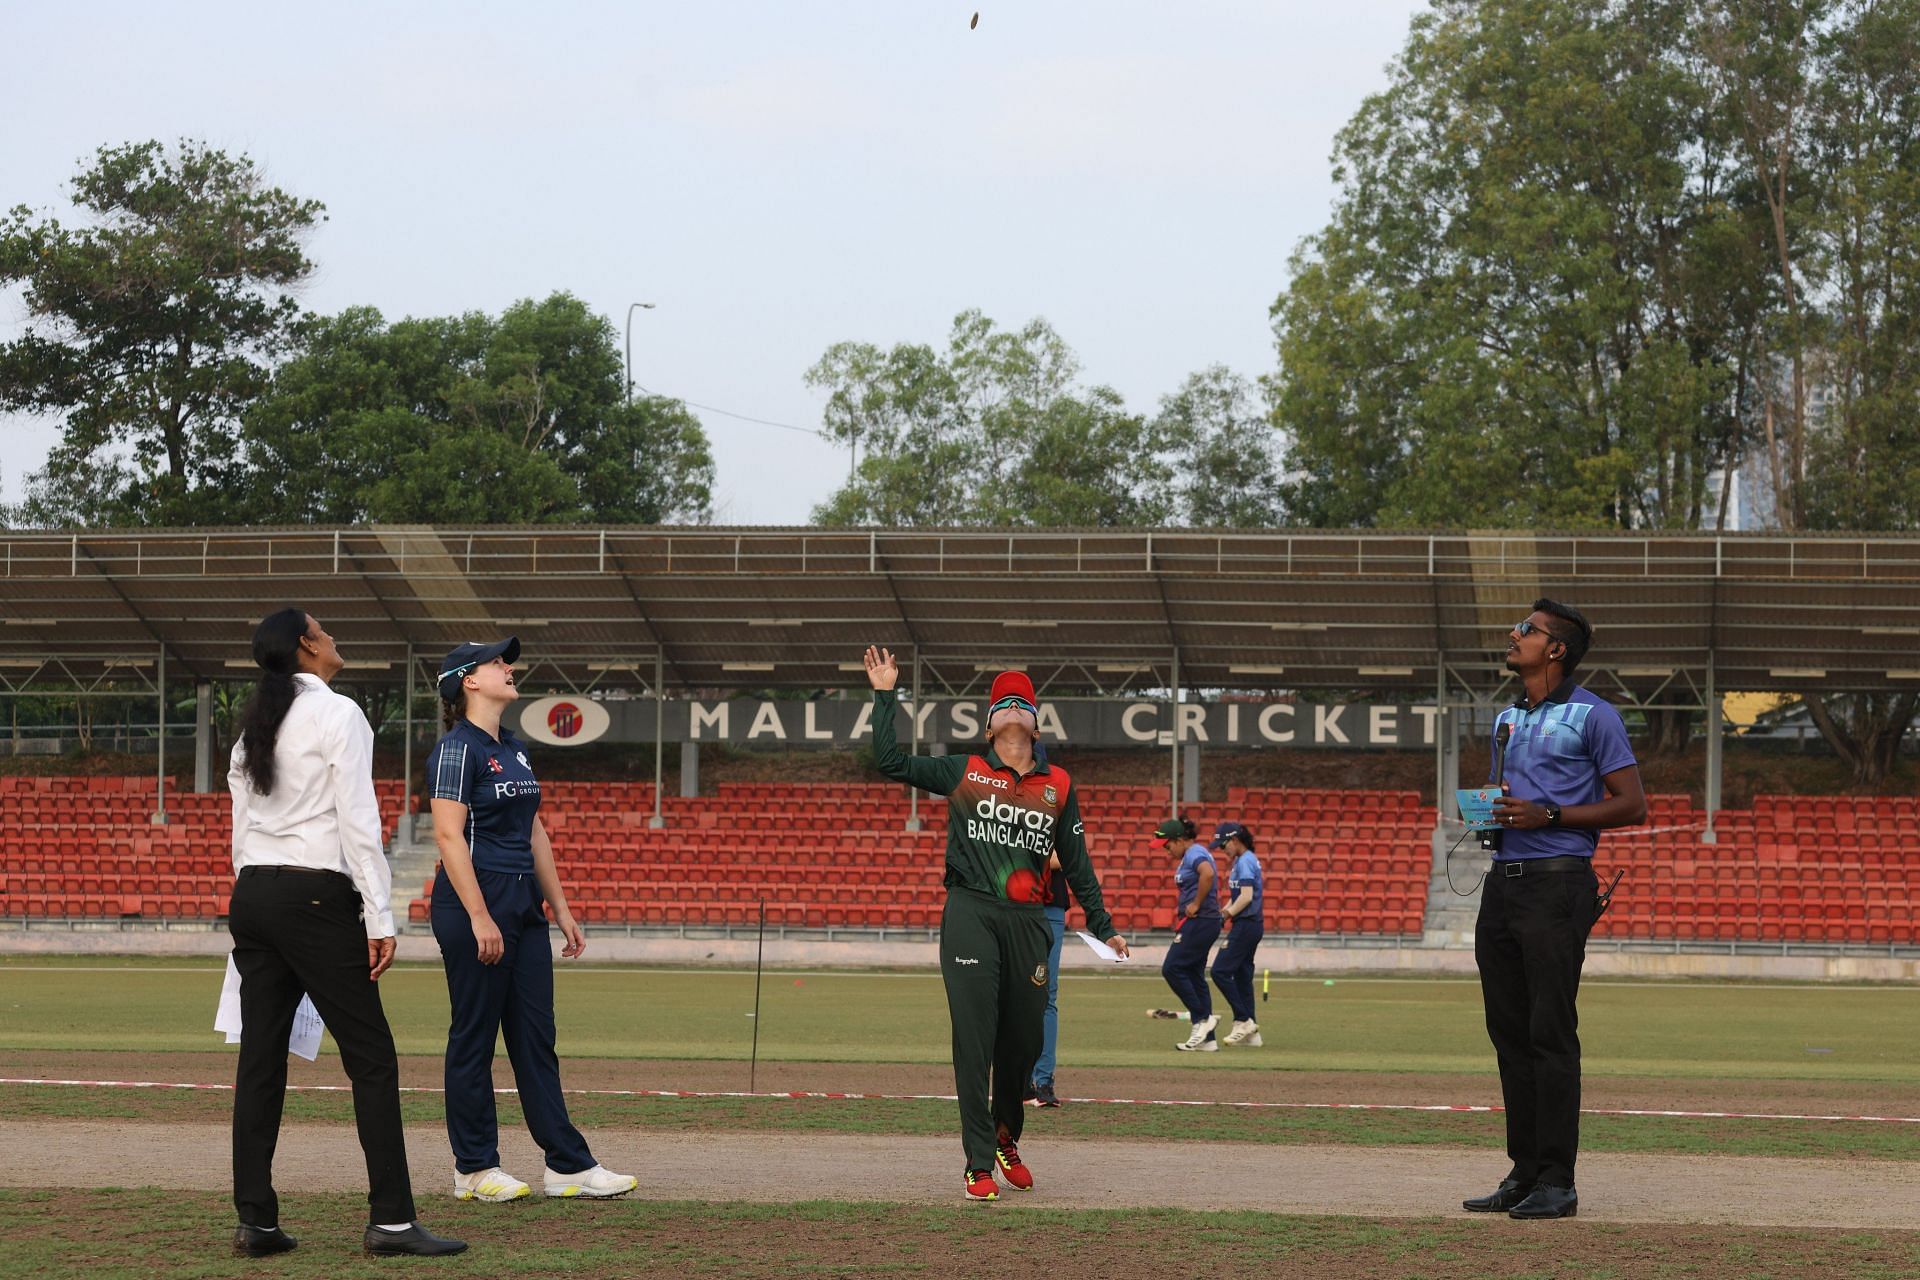 The Kinrara Oval played host to the Commonwealth Games Qualifiers earlier this year. Image source: ICC Twitter